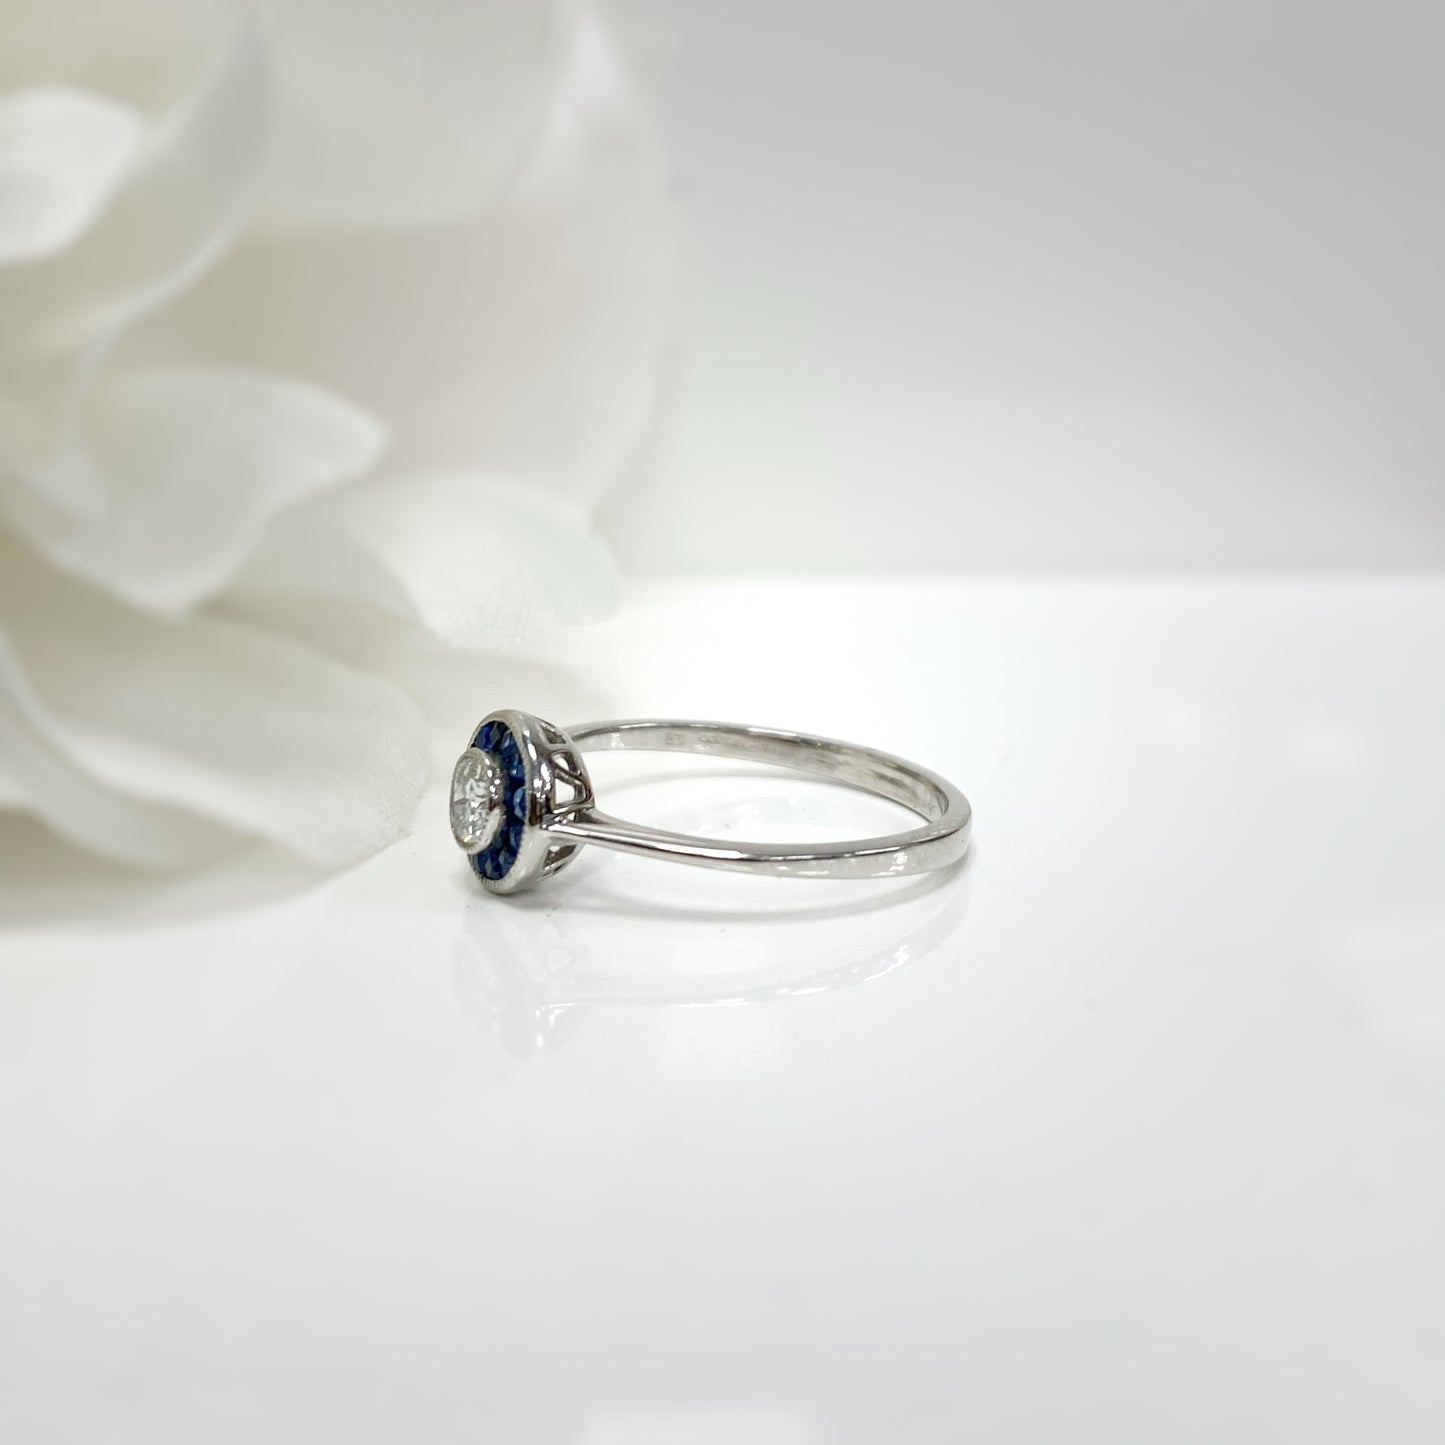 Art Deco Inspired Platinum Sapphire and Diamond Engagement Ring – SIZE N